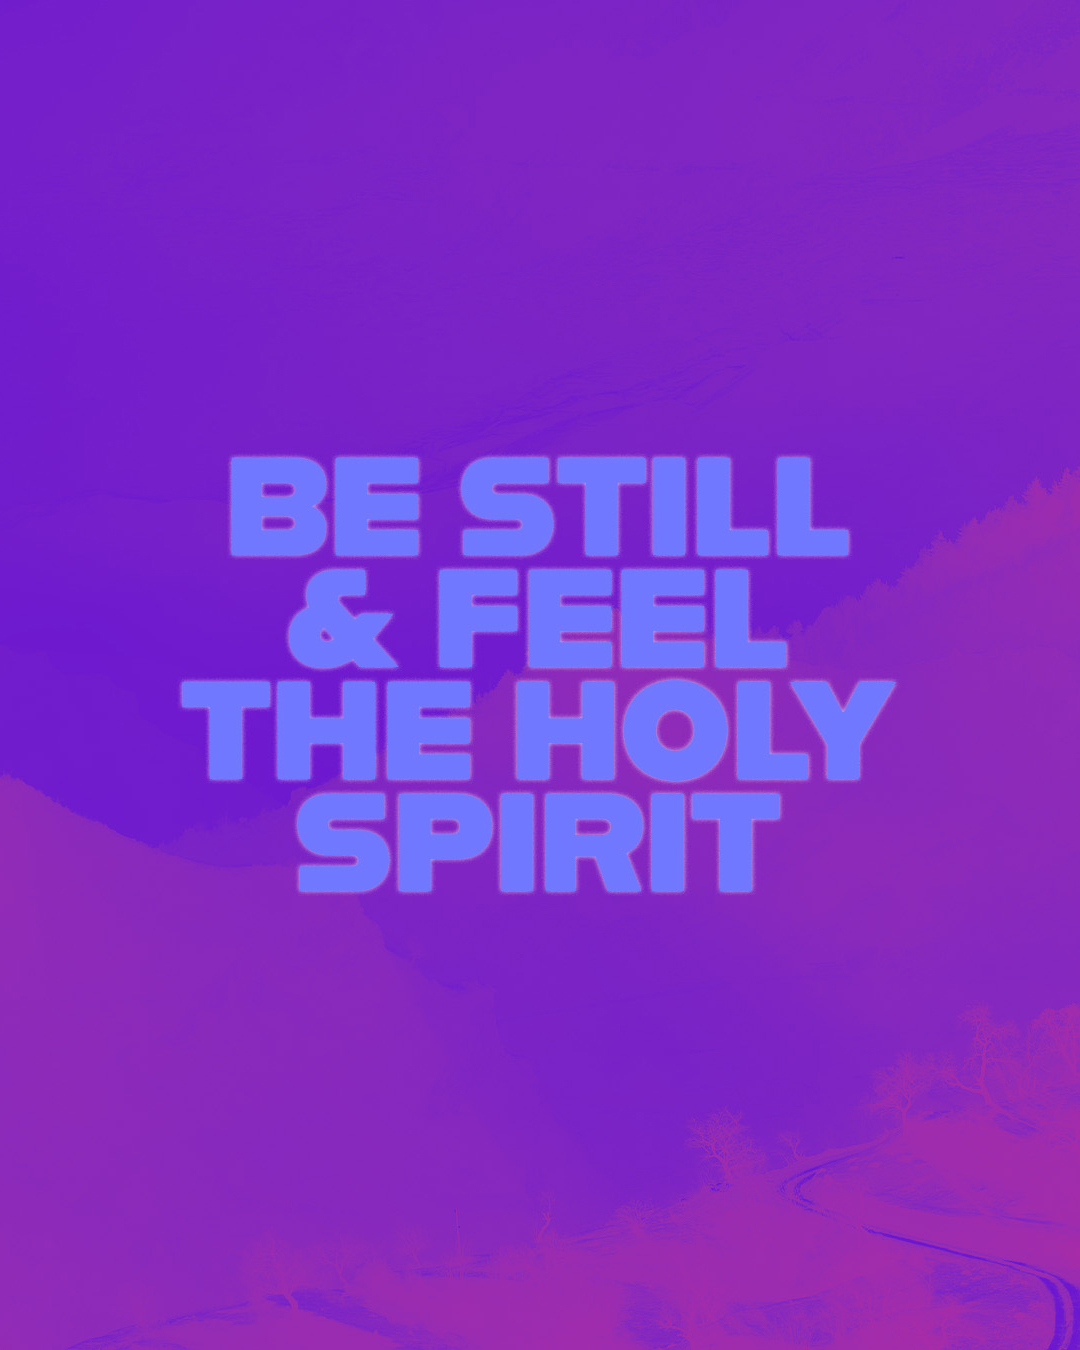 Be still and feel the Holy Spirit